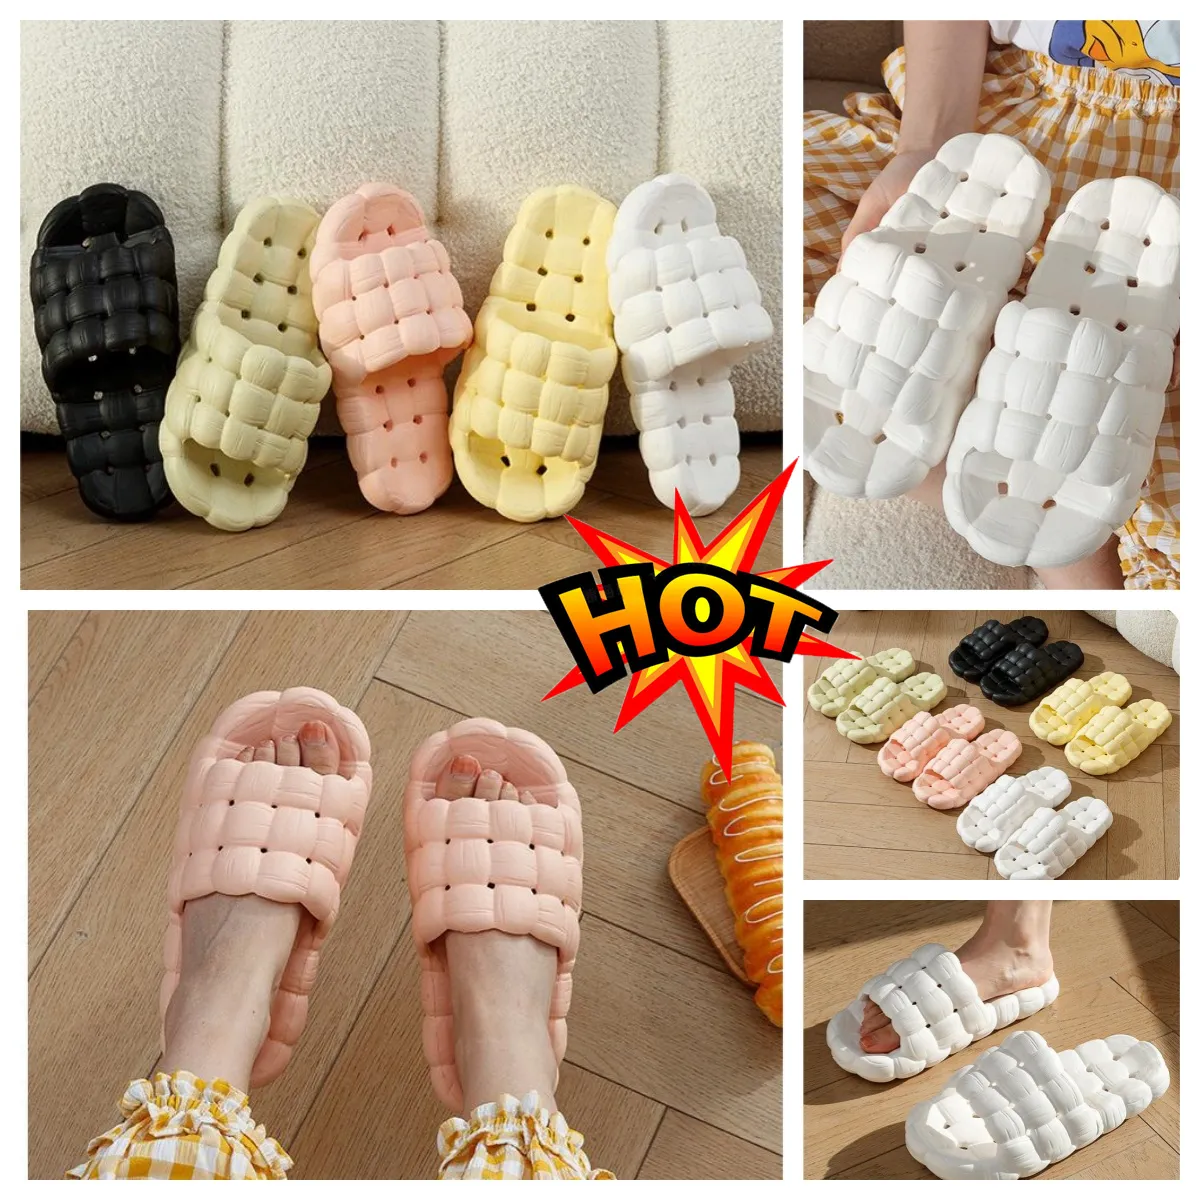 Slippers Home Shoes GAI Slide Bedroom Showers Room Warm Plush Living Room Softs Wear Cotton Slippers Ventilate Woman Men pink whites